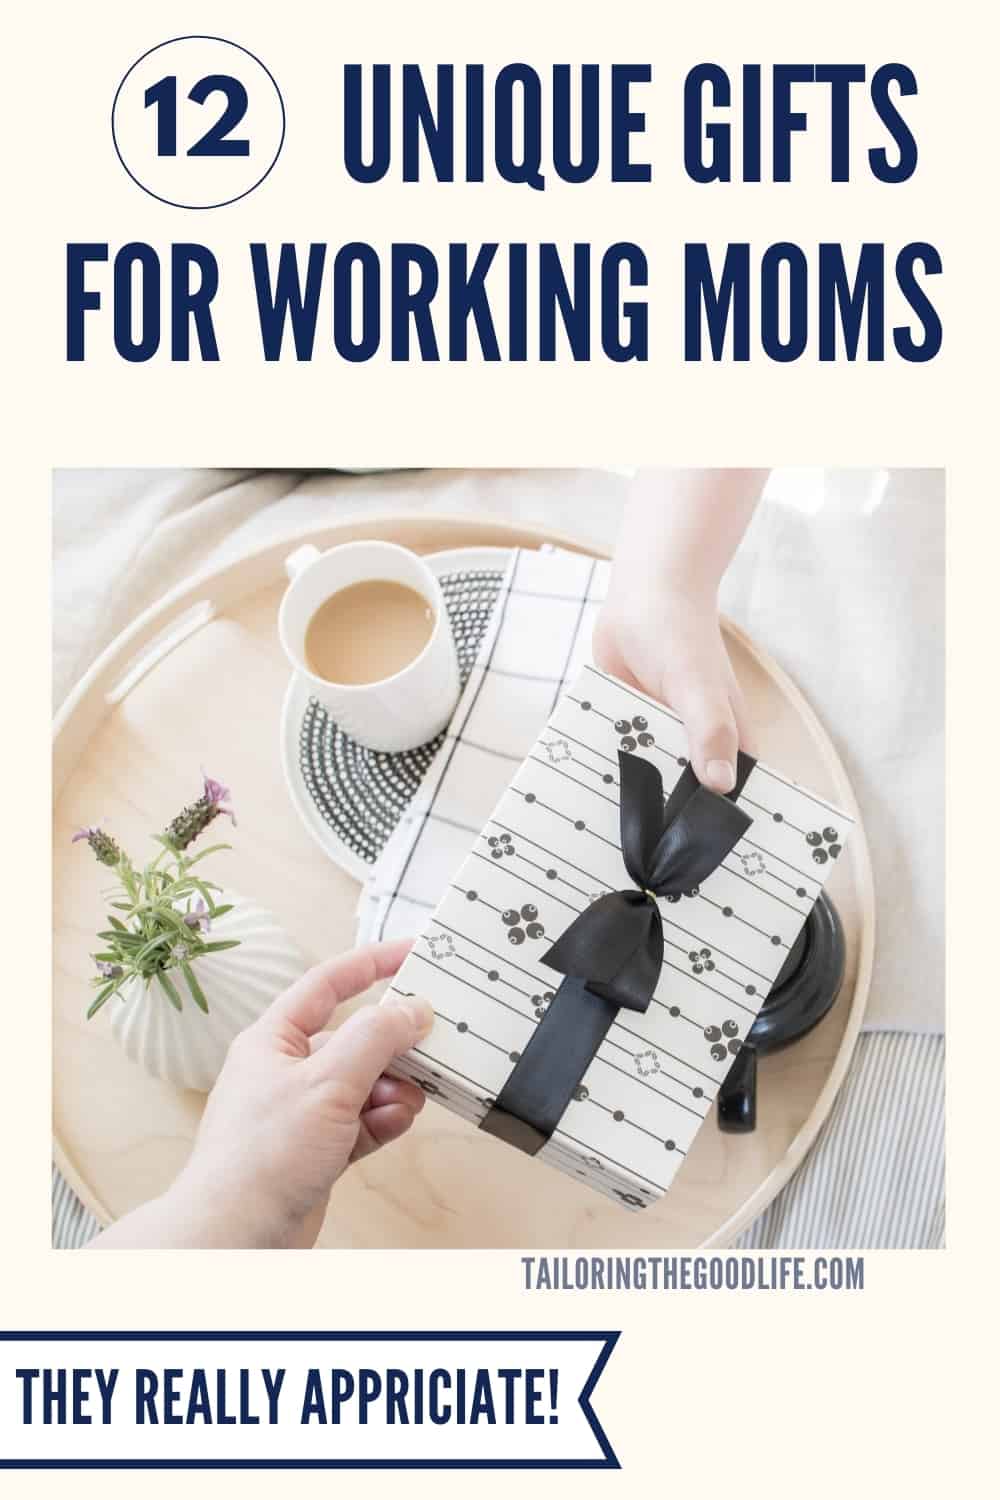 12 Unique Gifts for Working Moms They Really Appreciate